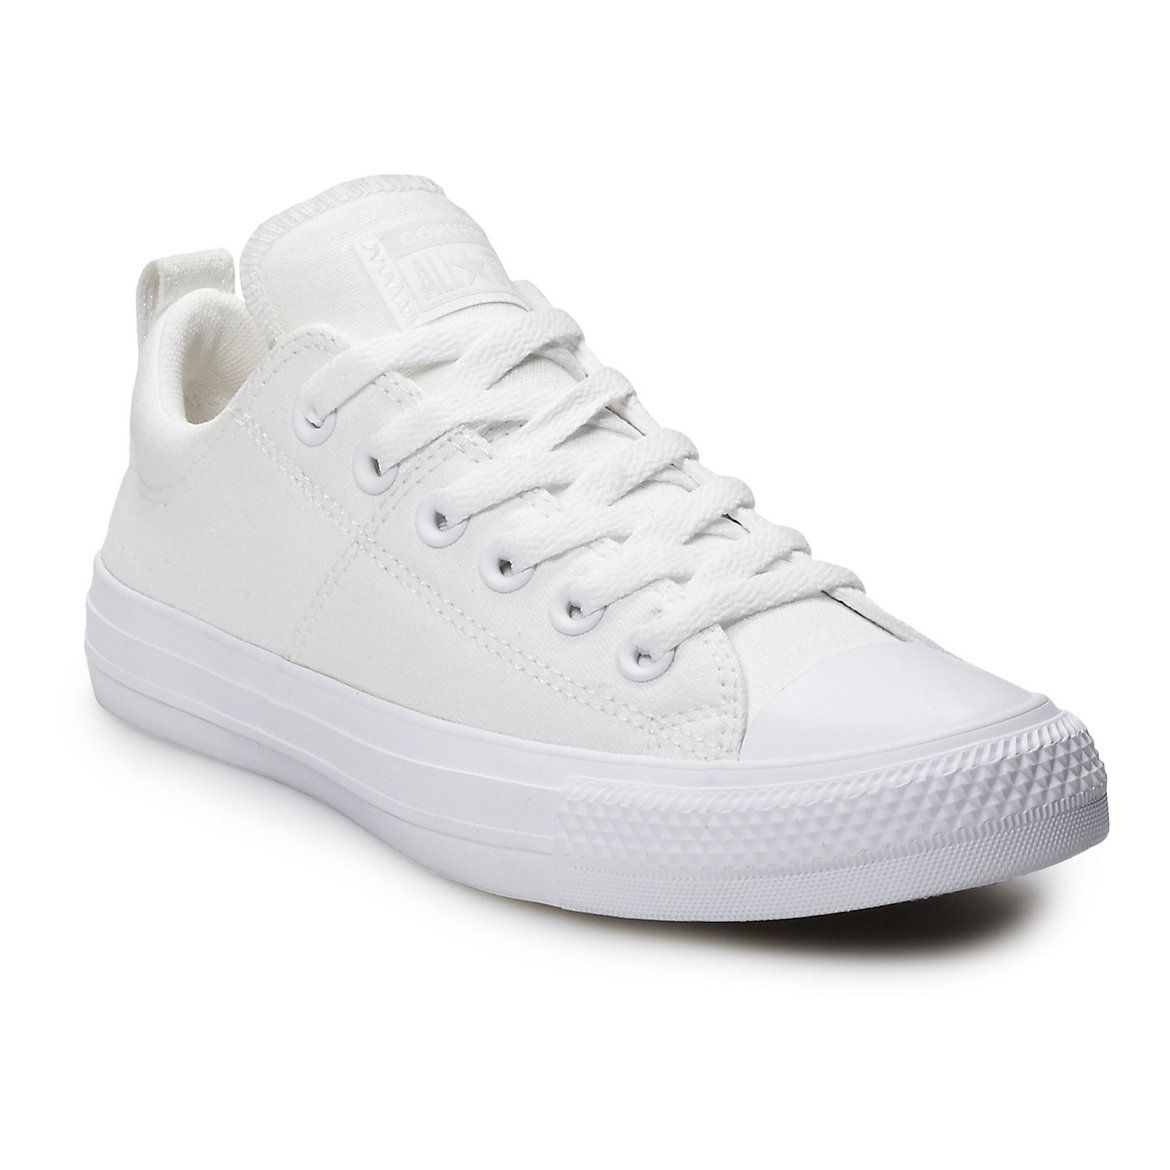 Women's Converse Chuck Taylor All Star Madison Sneakers | Kohl's